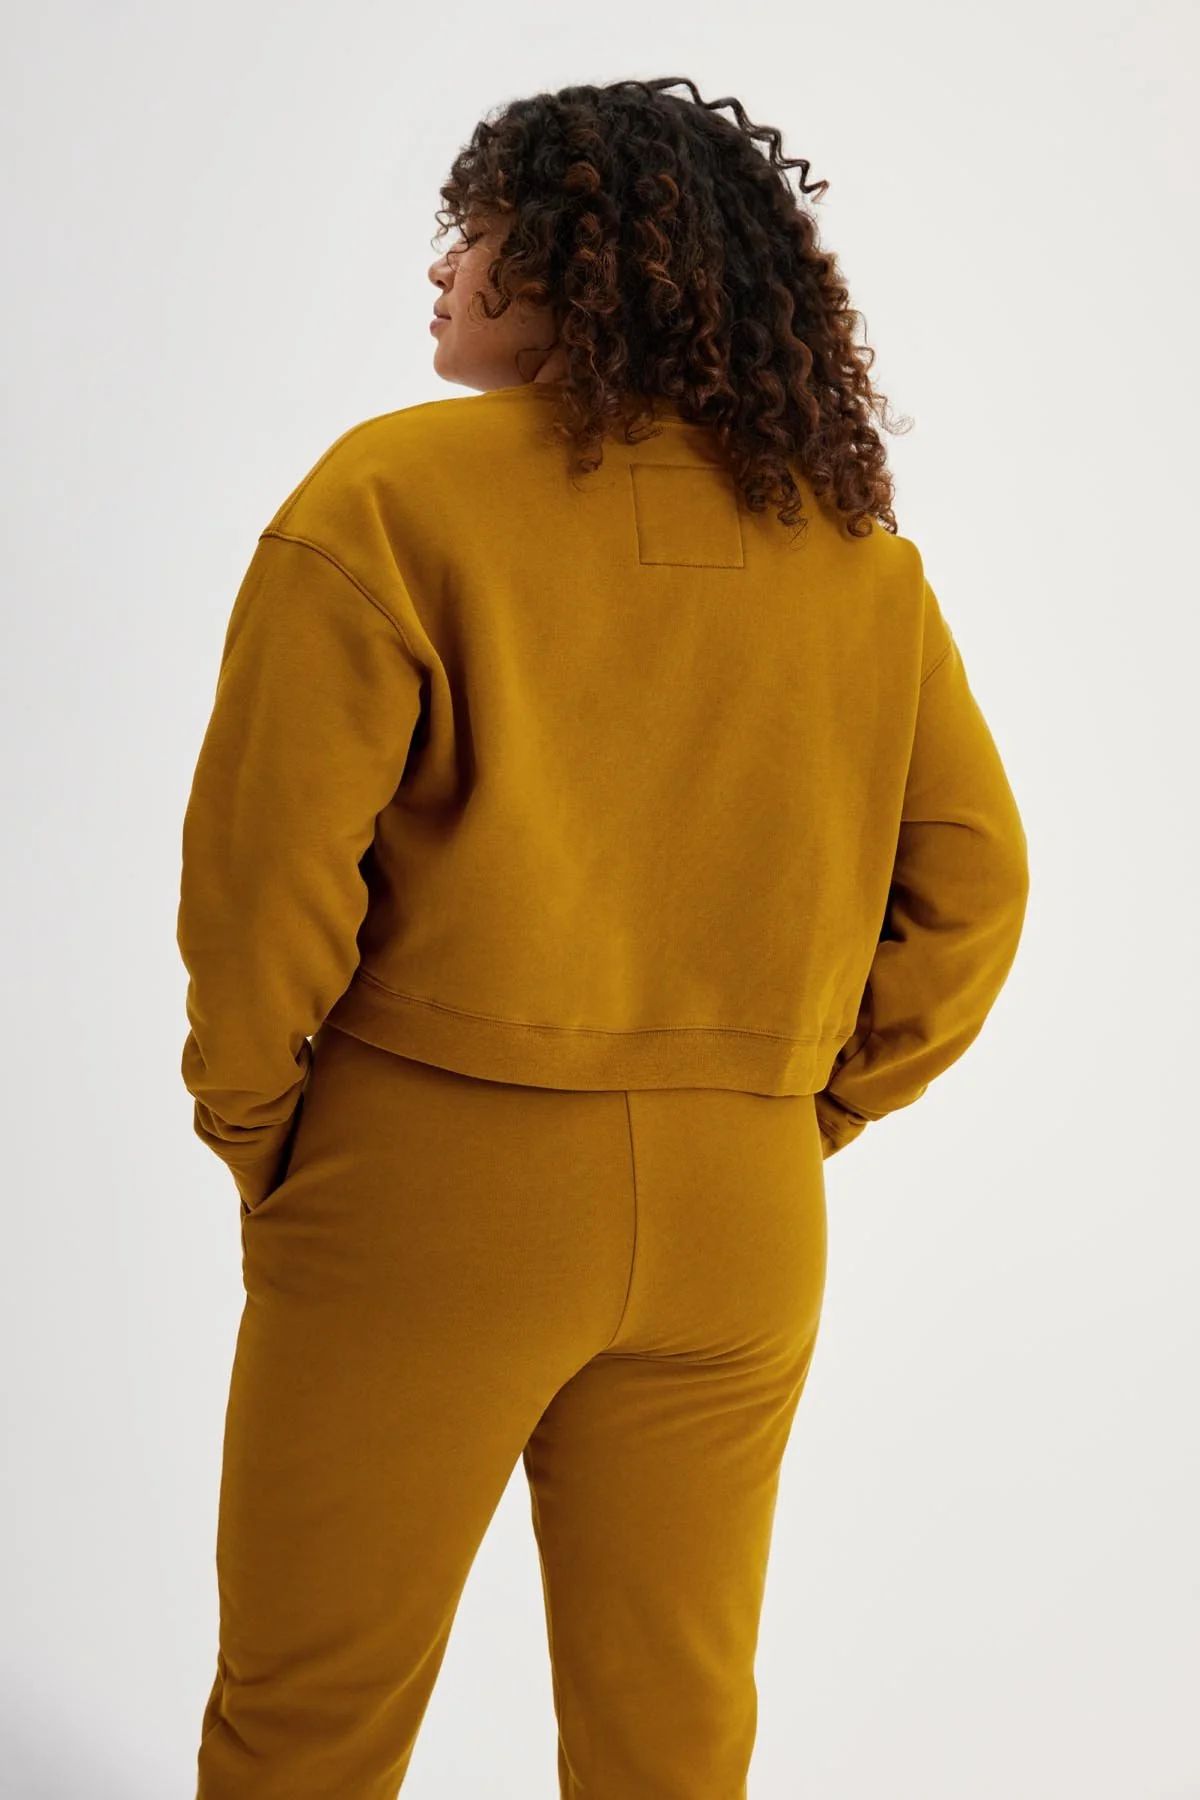 Sycamore 50/50 Cropped Sweatshirt | Girlfriend Collective